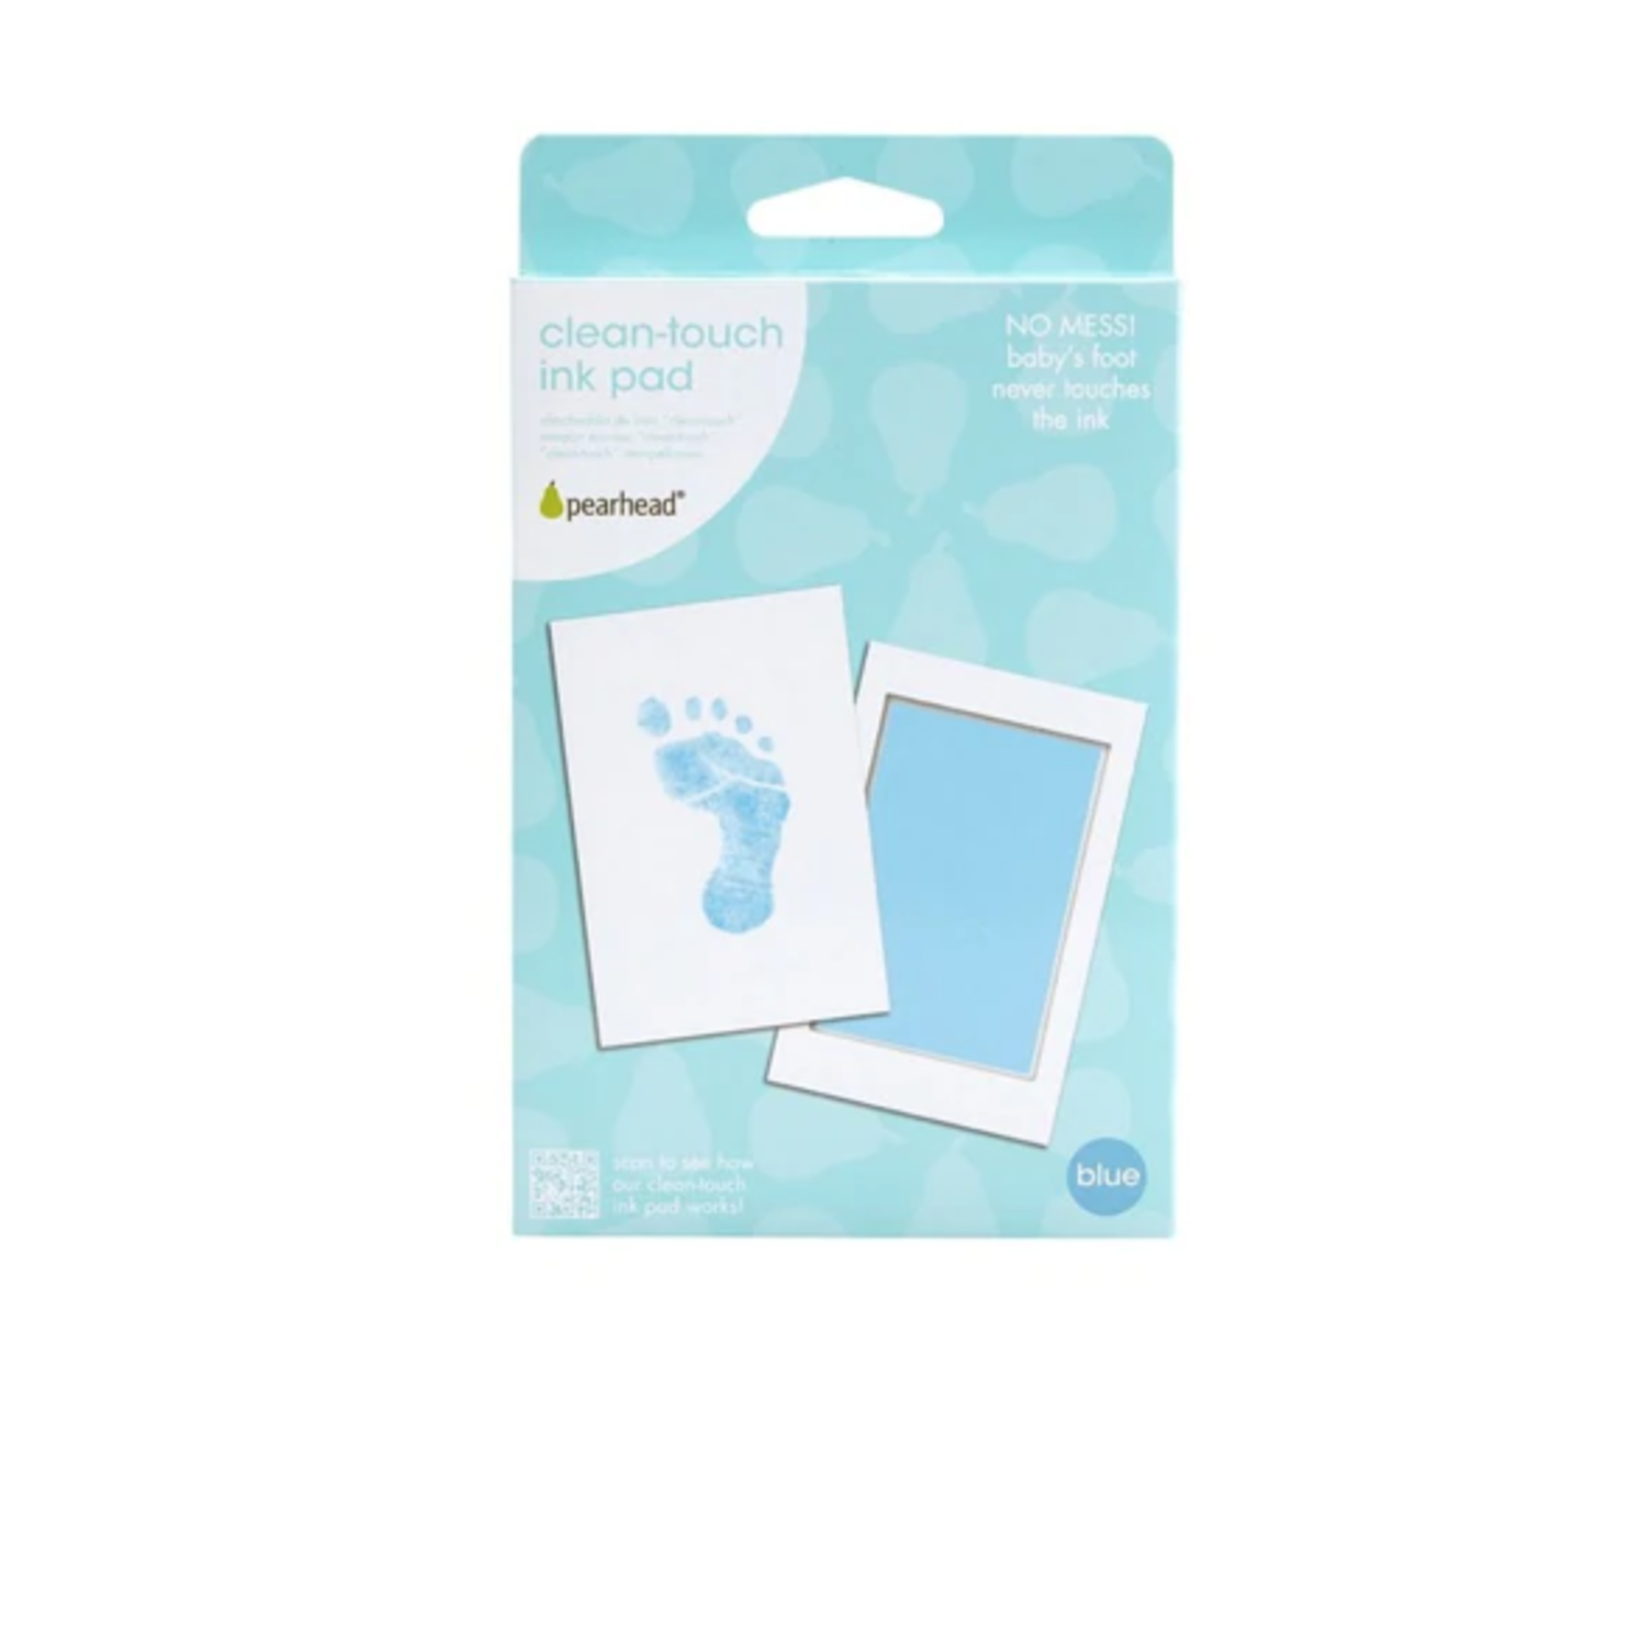 Pearhead CLEAN TOUCH INK PAD-BLUE